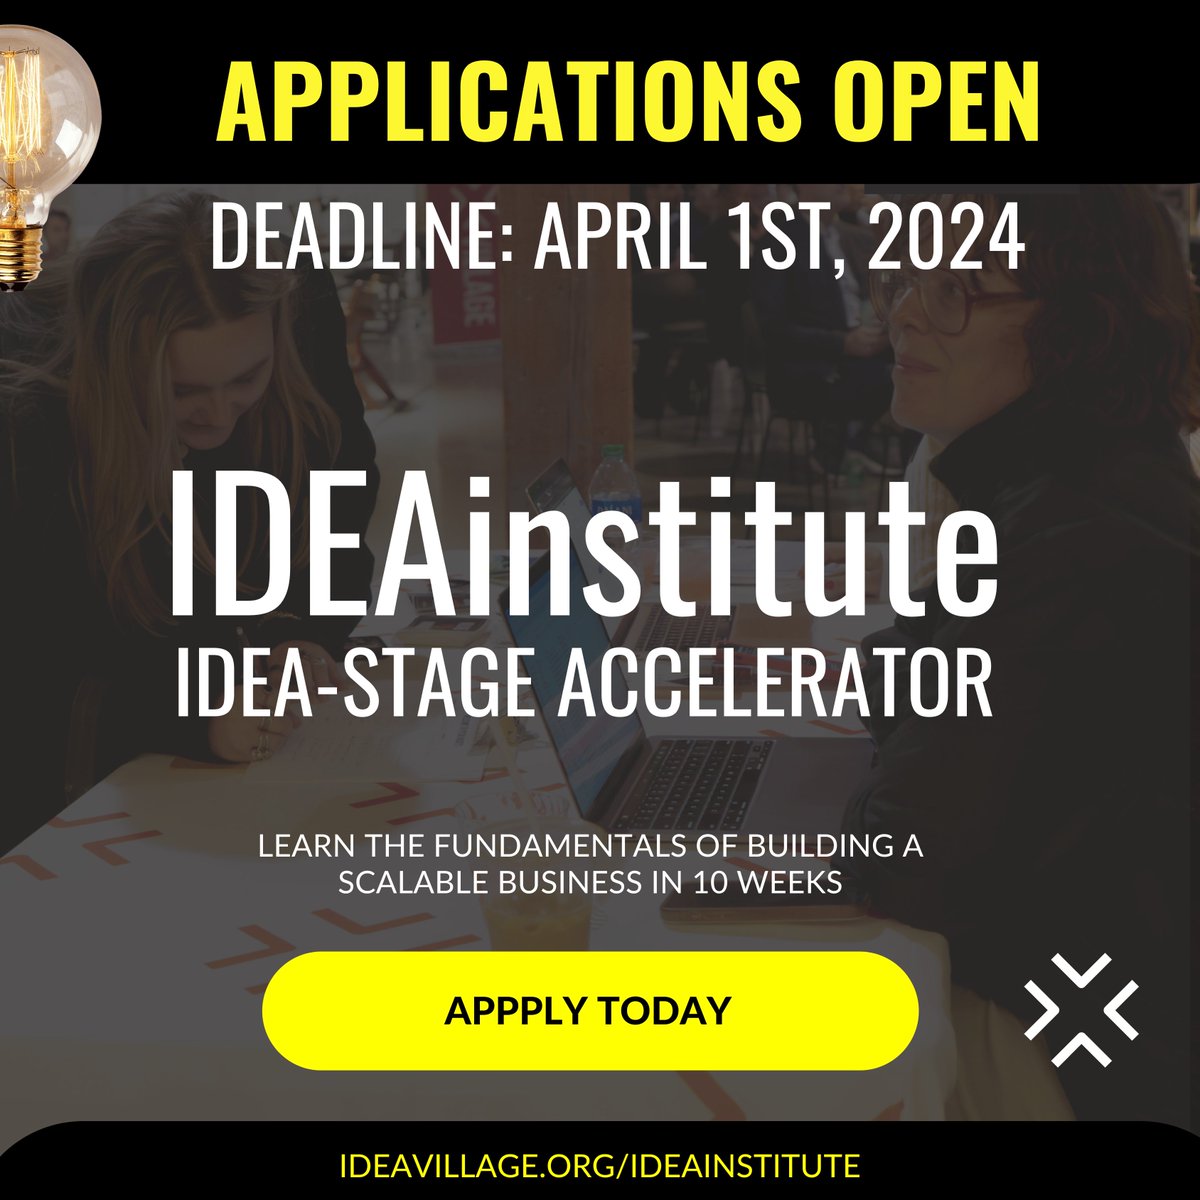 Apply for IDEAinstitute and engage in weekly modules with other like-minded entrepreneurs, learn from guest speakers and coaches, and more! Deadline to apply: Monday, April 1st, 2024. Apply: ideavillage.org/ideainstitute